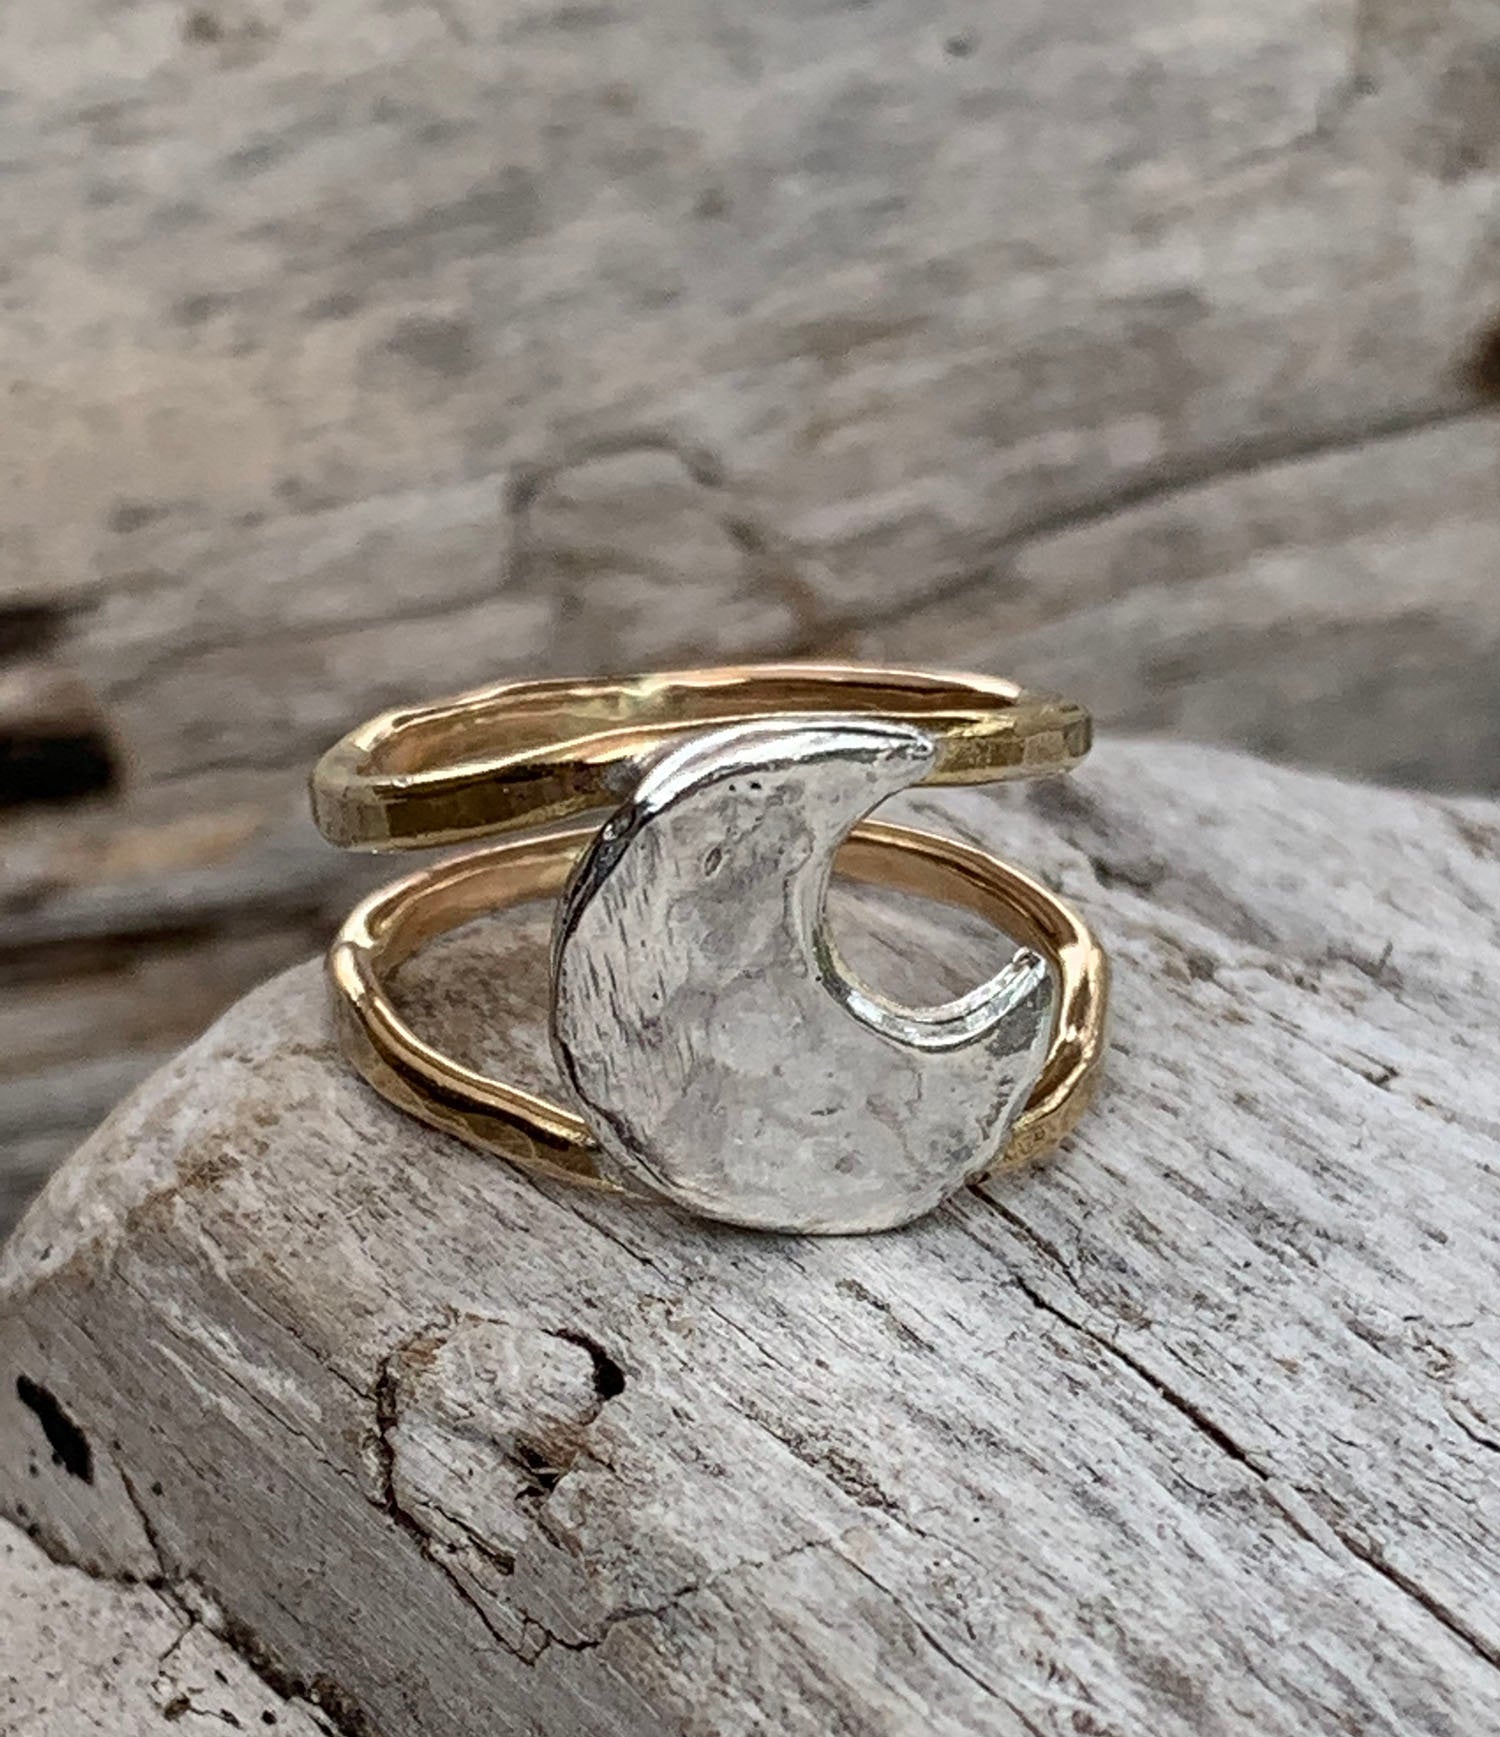 Silver Hammered Moon Ring with Double 14K Gold Fill Bands